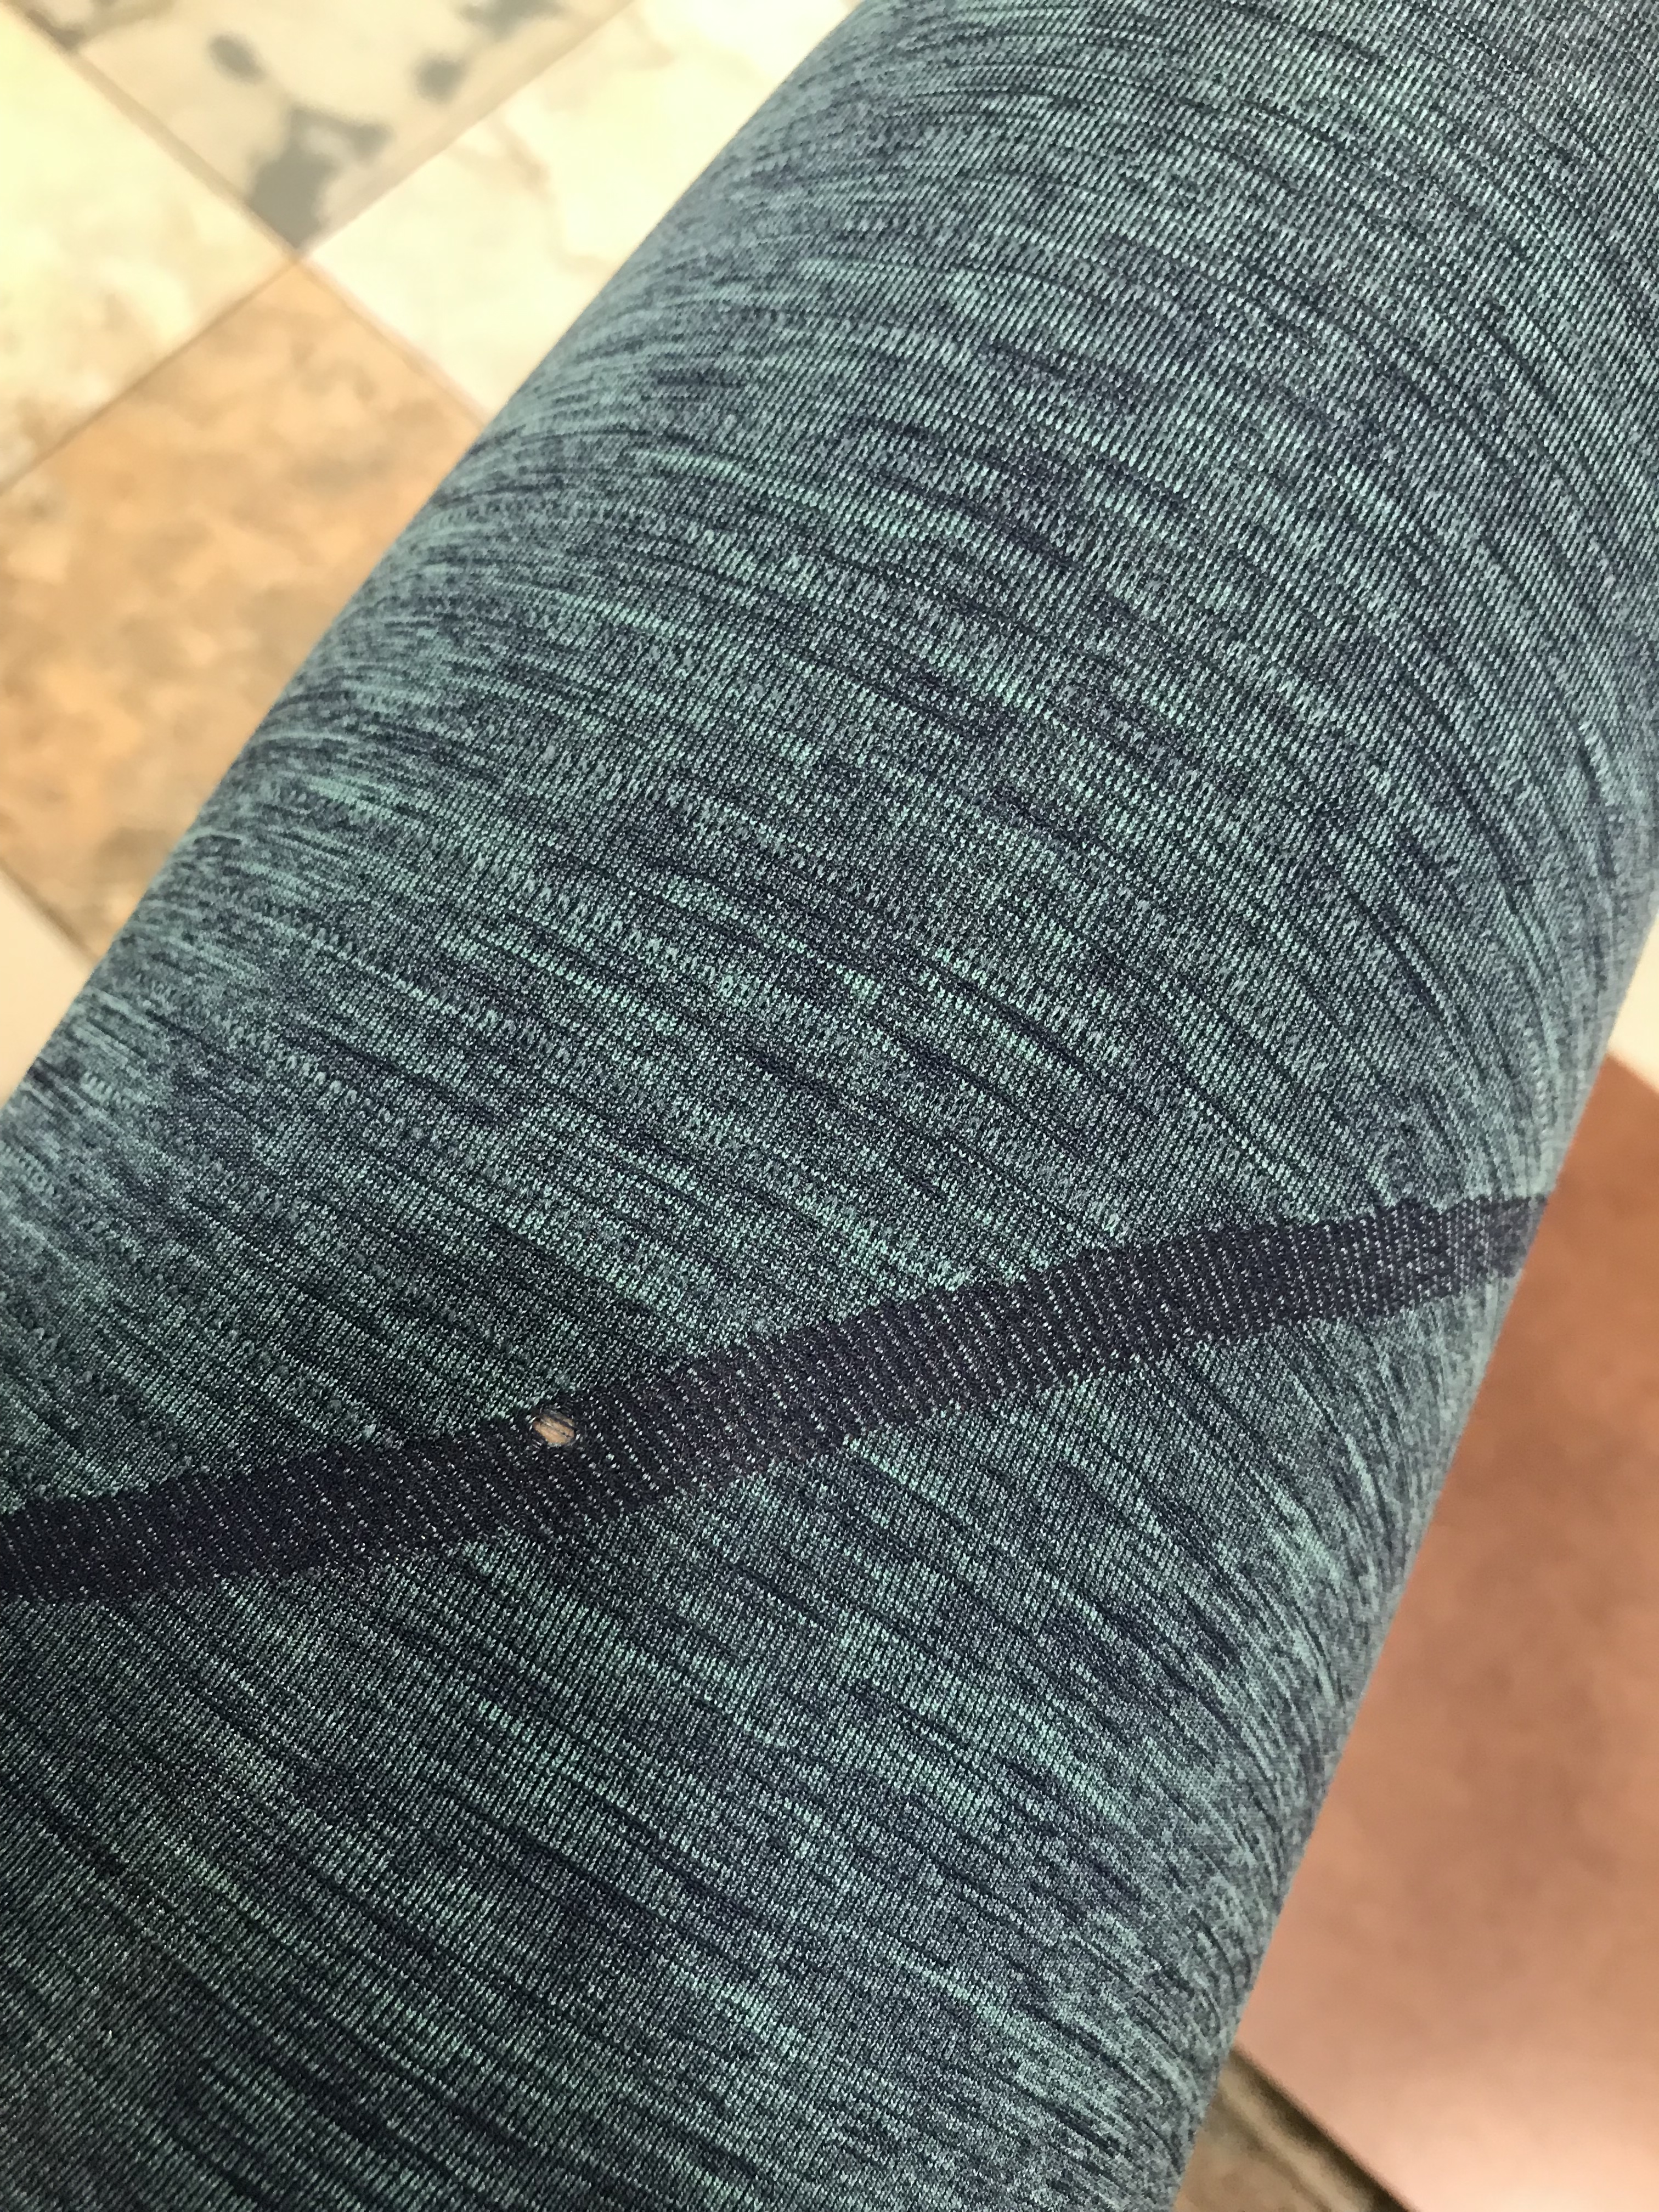 Honest Alphalete Revival Legging Review – A hole 3 months in!? – Running In  Pearls